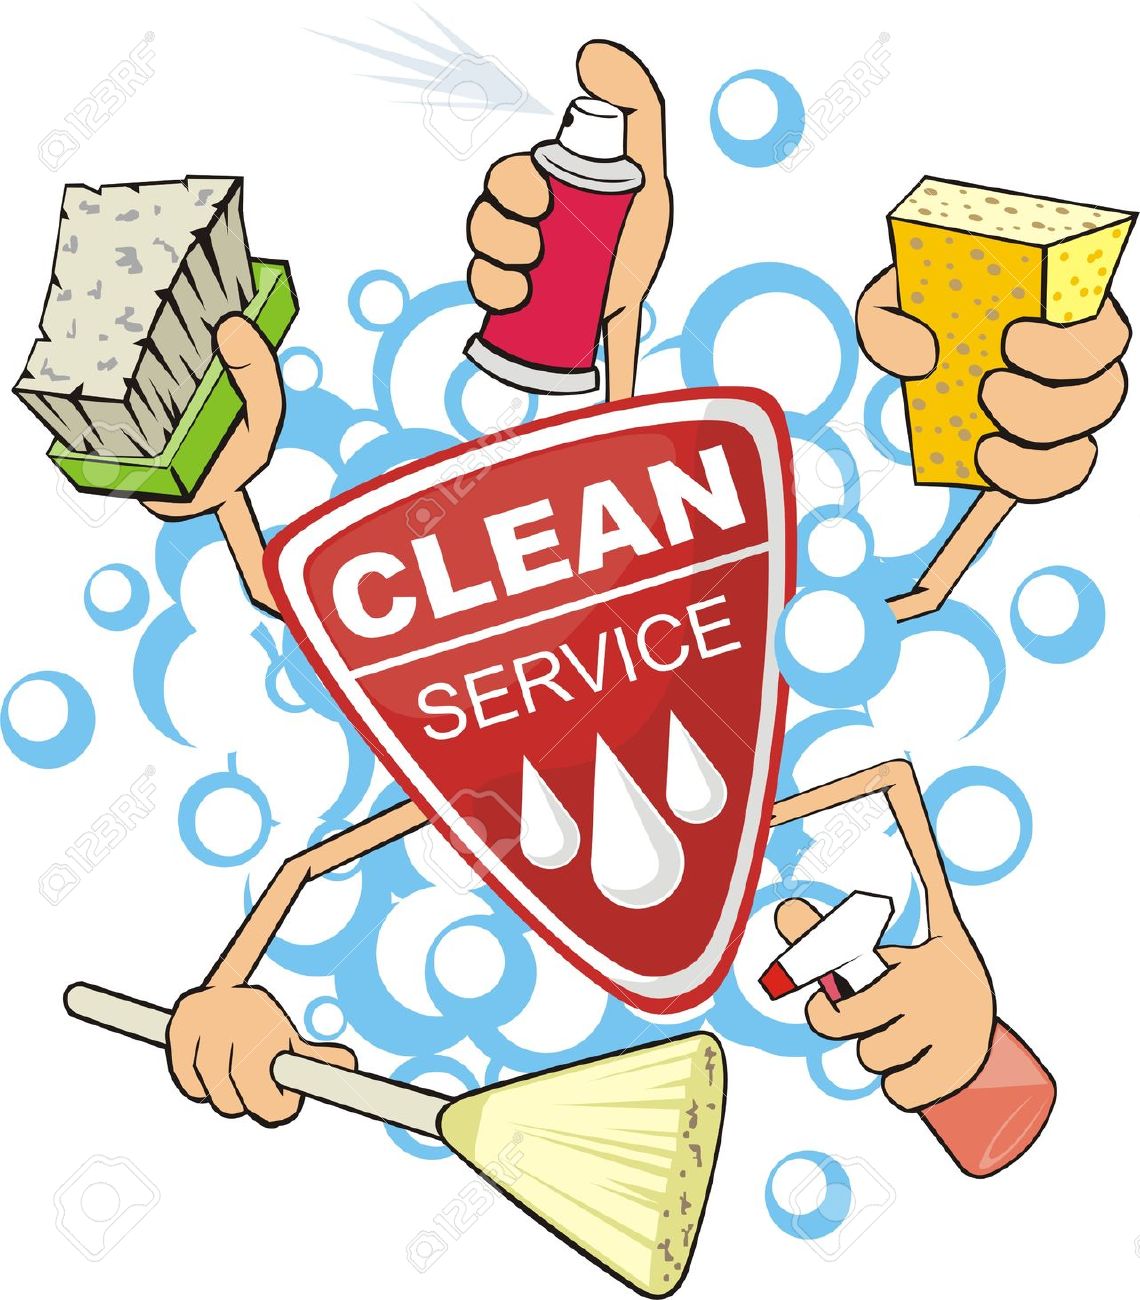 Cleaning clip art clipart